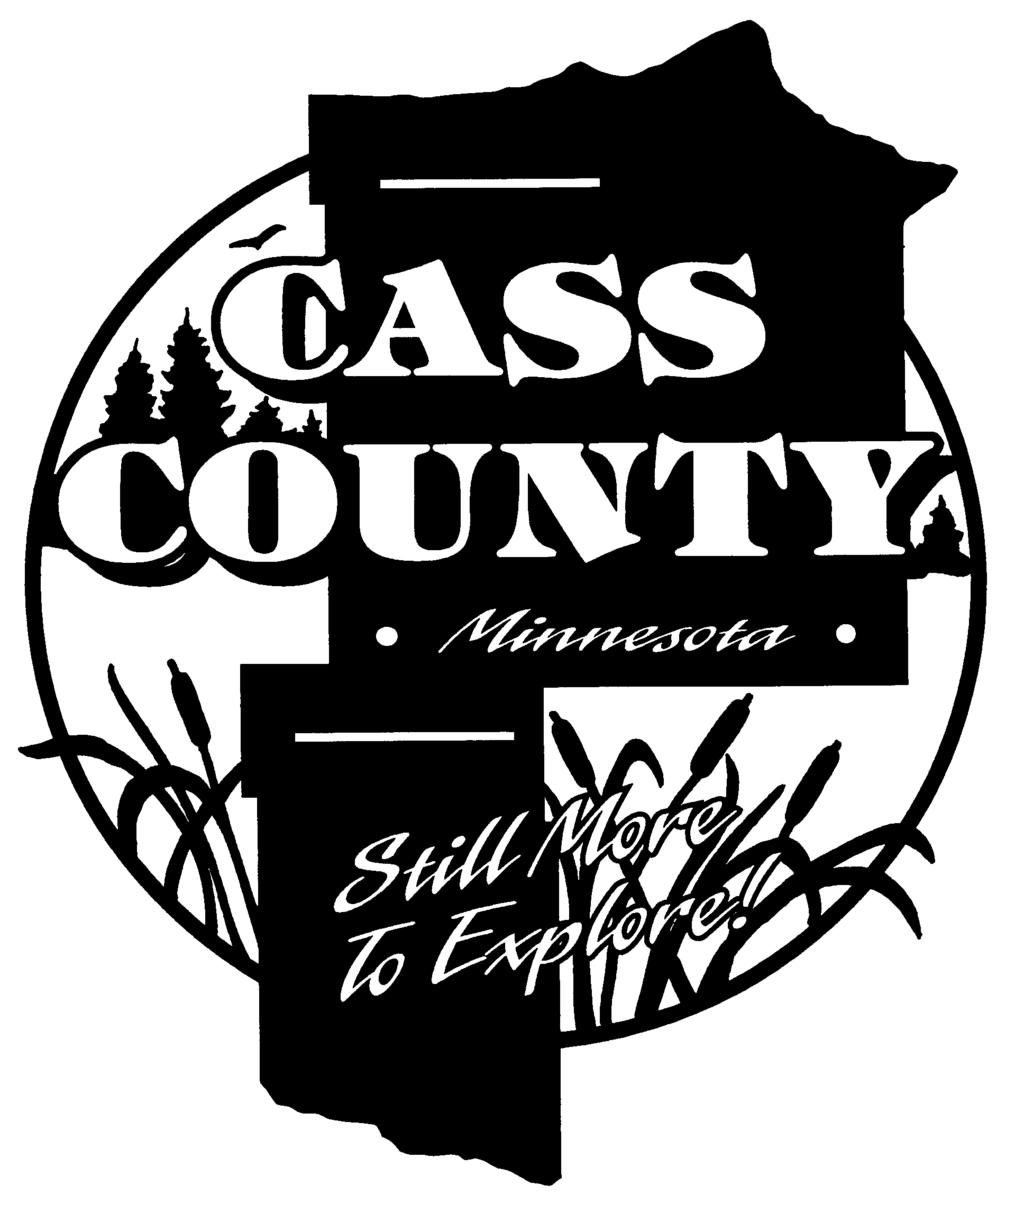 Cass County Planning Commission/Board of Adjustment September 12, 2016 The Cass County Planning Commission/Board of Adjustment conducted a regular meeting September 12, 2016 in the meeting room of